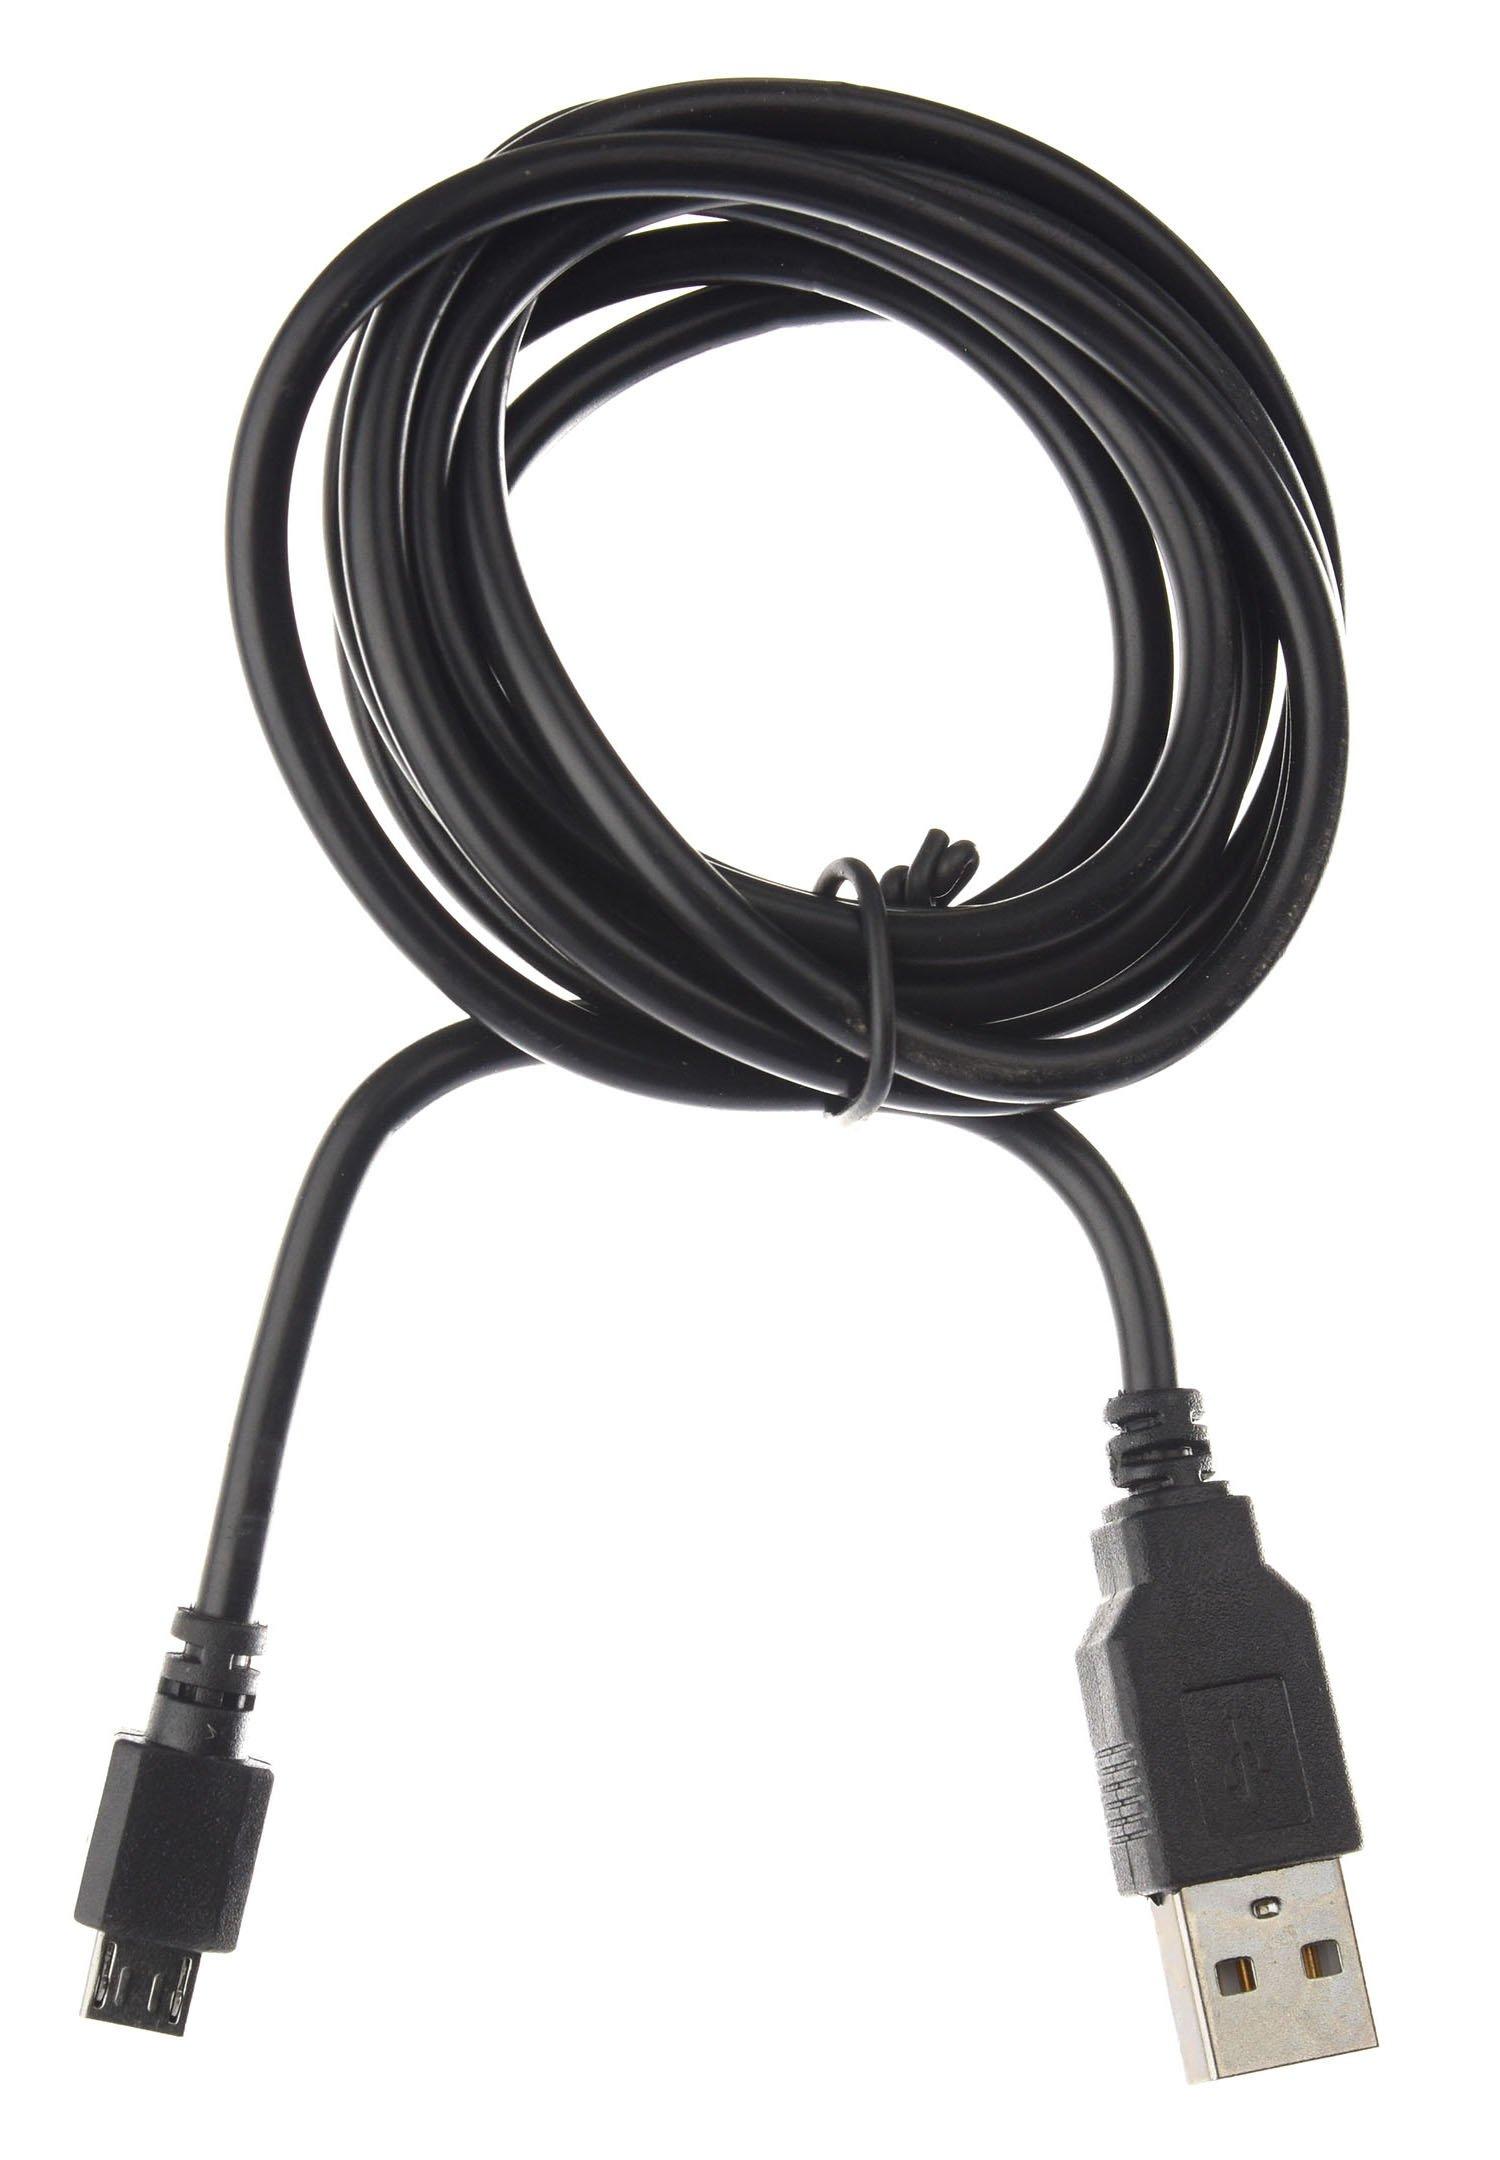 ps4 controller charger cable